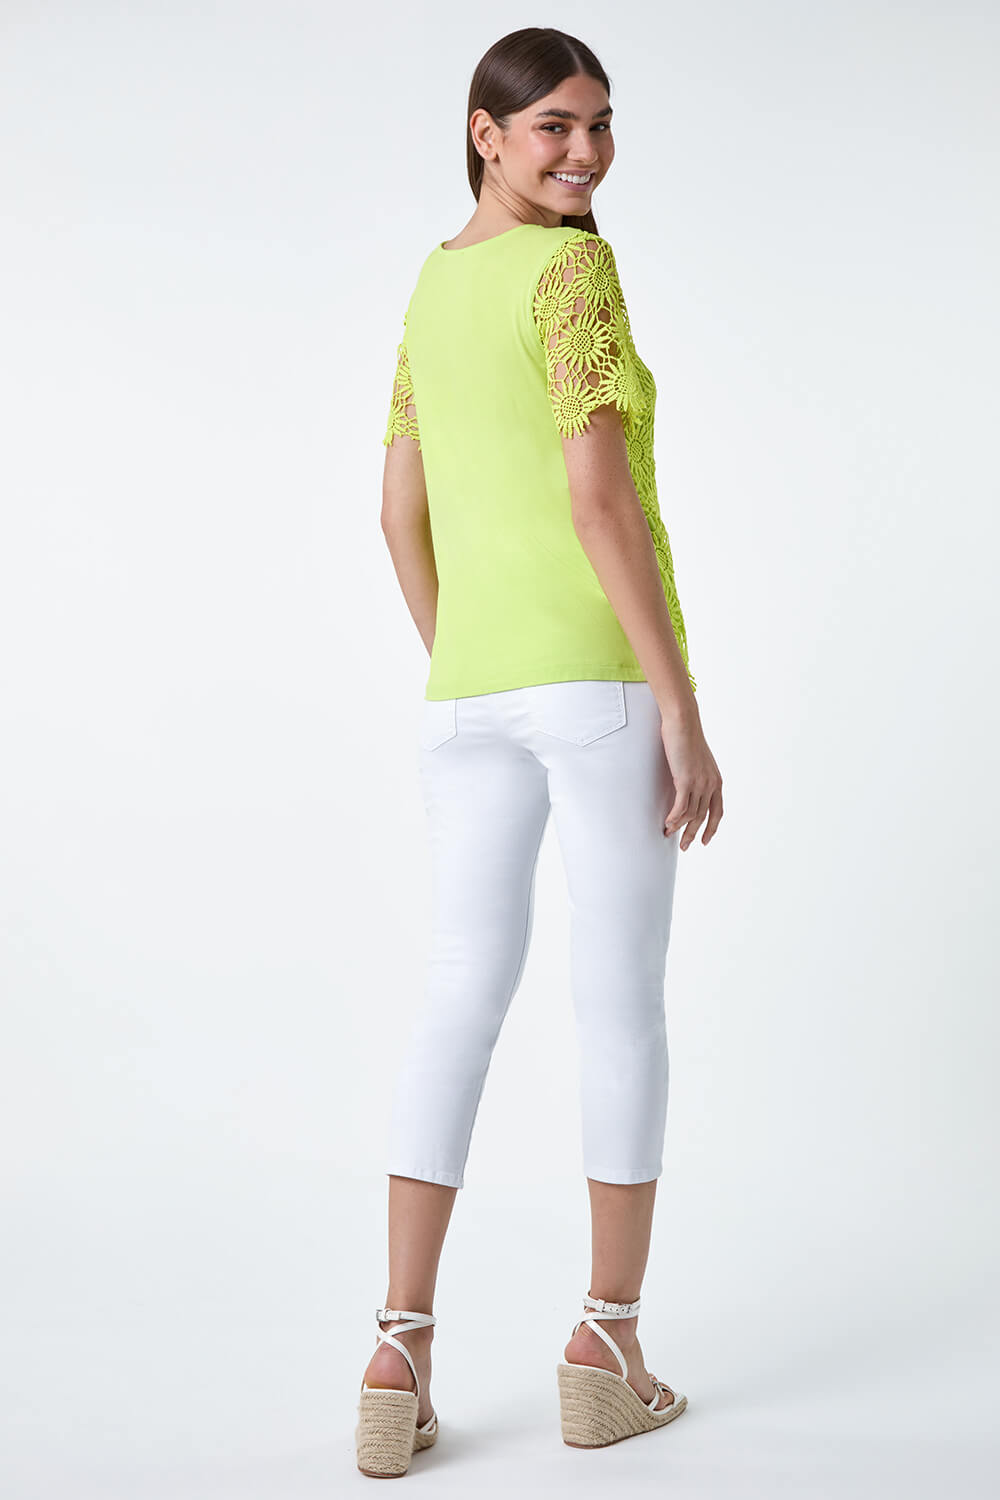 Yellow Floral Lace Stretch Jersey T-Shirt, Image 3 of 5